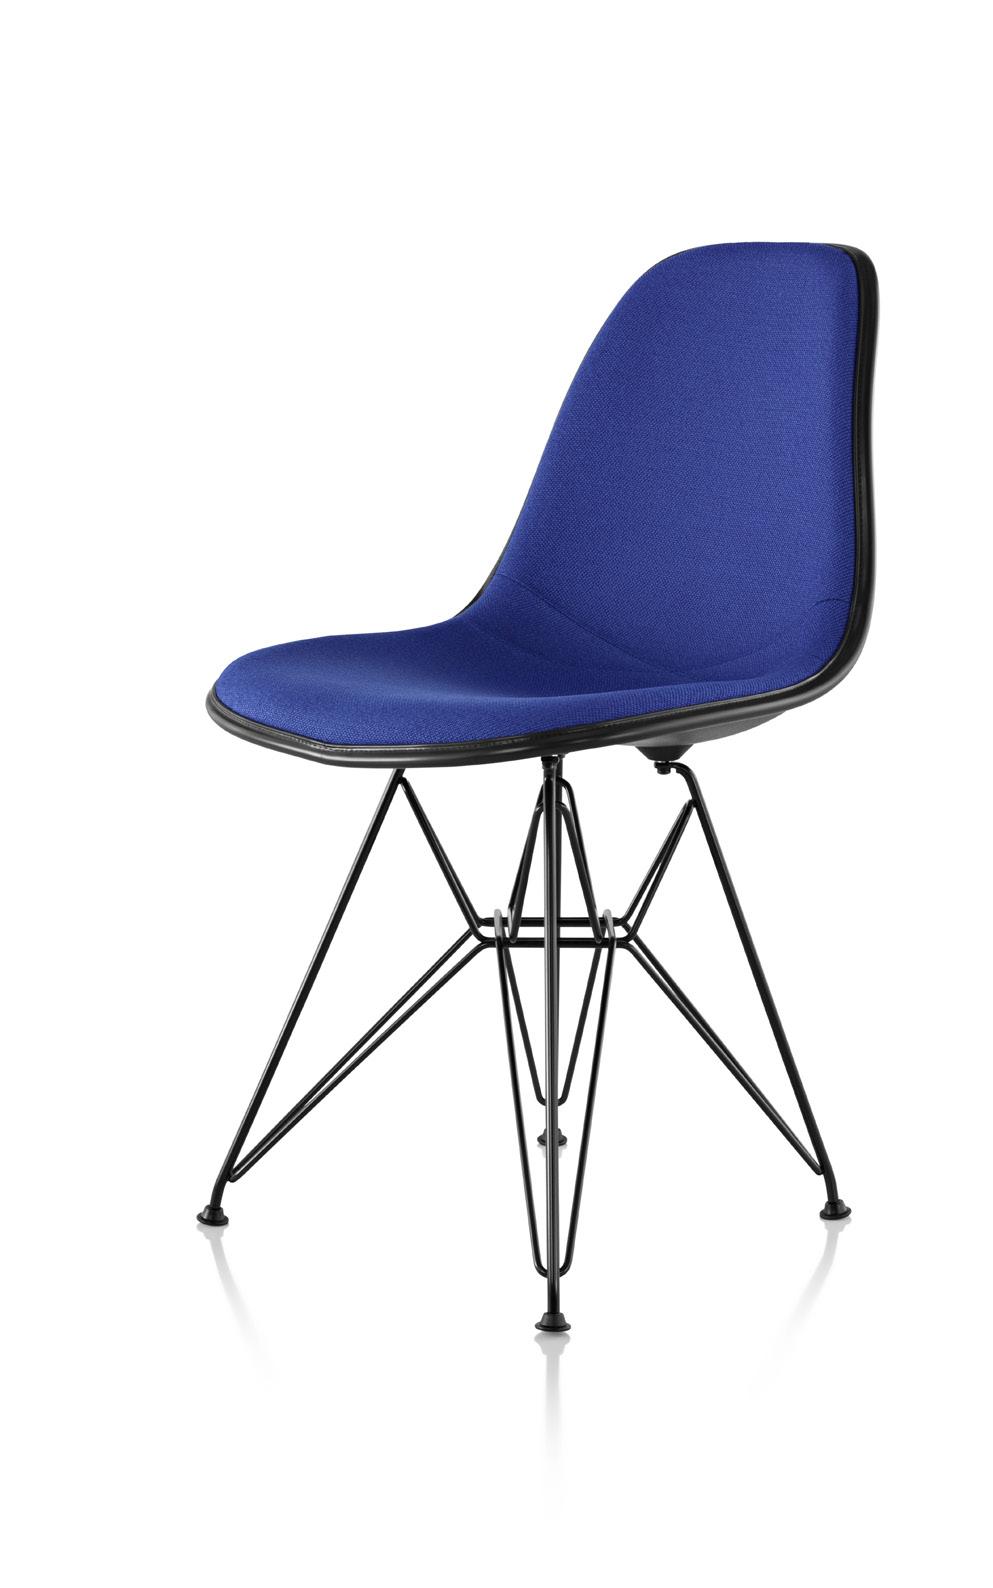 Eames Upholstered Molded Plastic Side Chair Wire Base 16% recycled content; 84% recyclable The organic shape and sophisticated lines of molded plastic side chair make it a desirable design